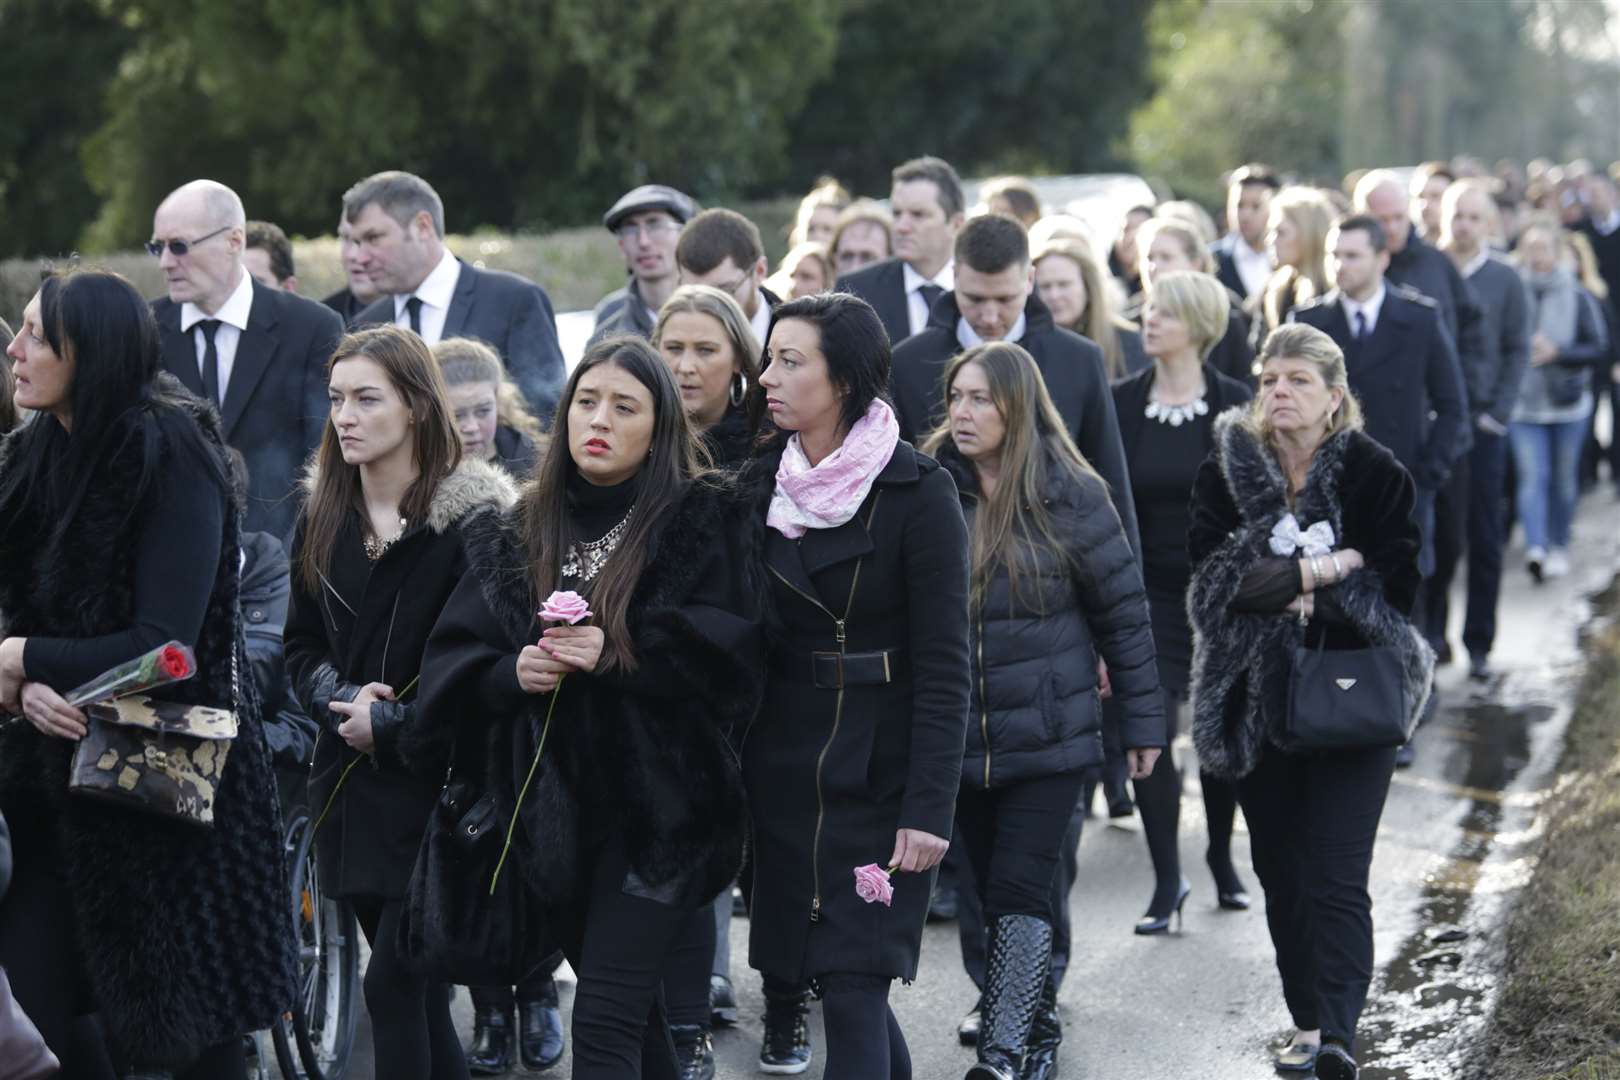 Hundreds of people lined the street in Hunton to say their goodbyes